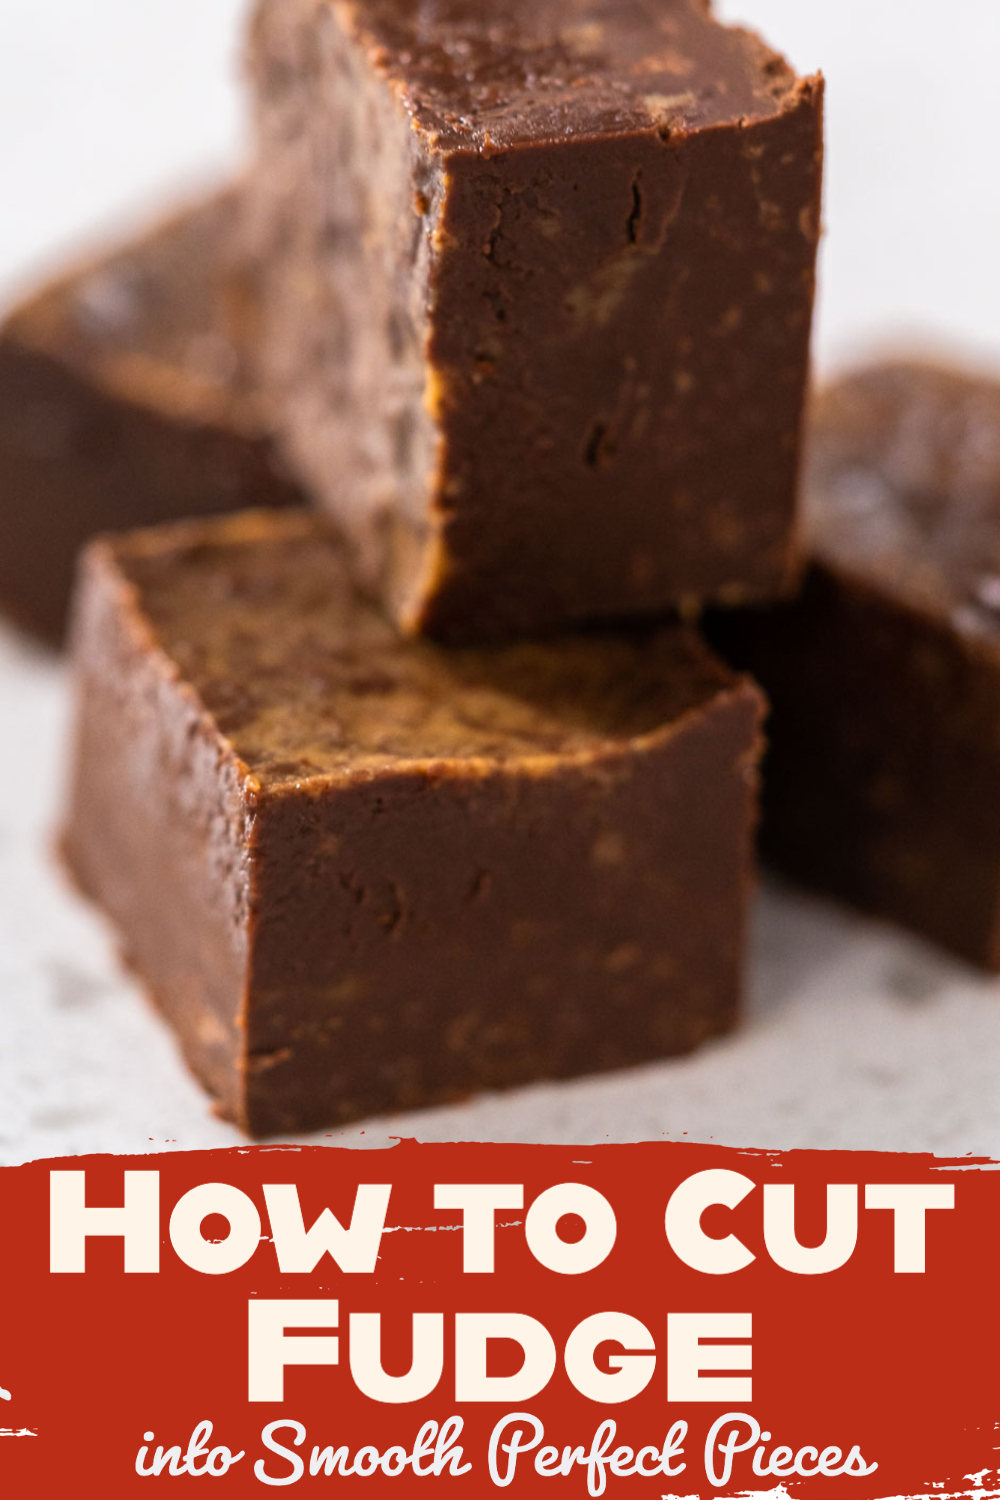 How to Cut Fudge into Smooth Perfect Pieces